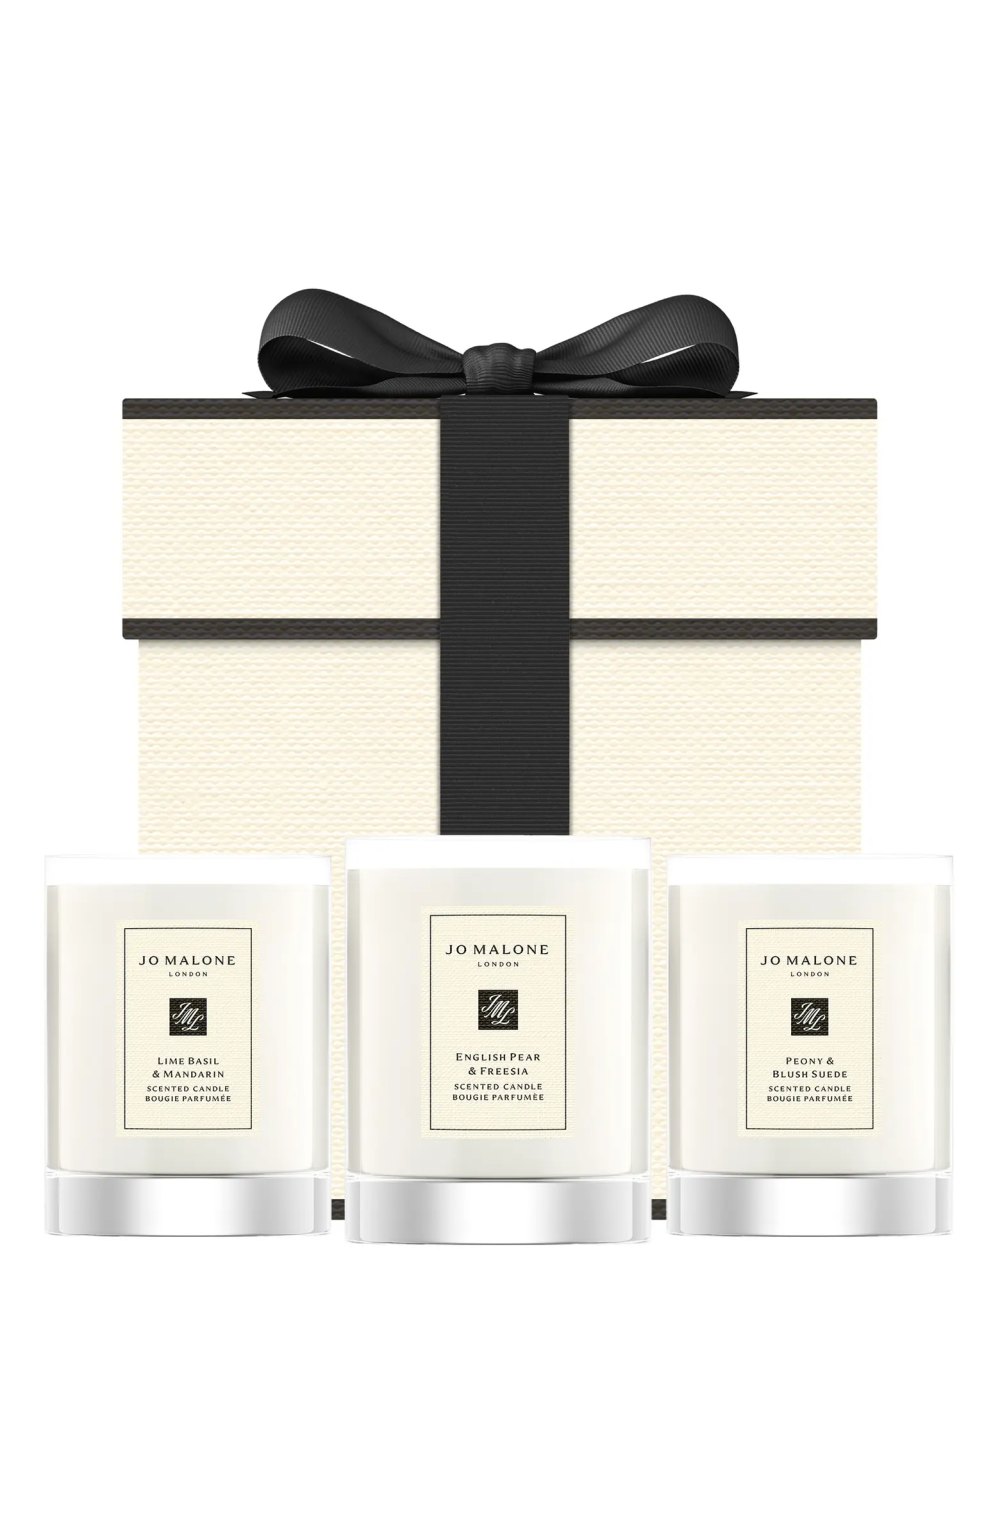 https://www.usmagazine.com/wp-content/uploads/2022/12/Jo-Malone-Travel-Candle-Collection-.webp?w=1000&quality=86&strip=all